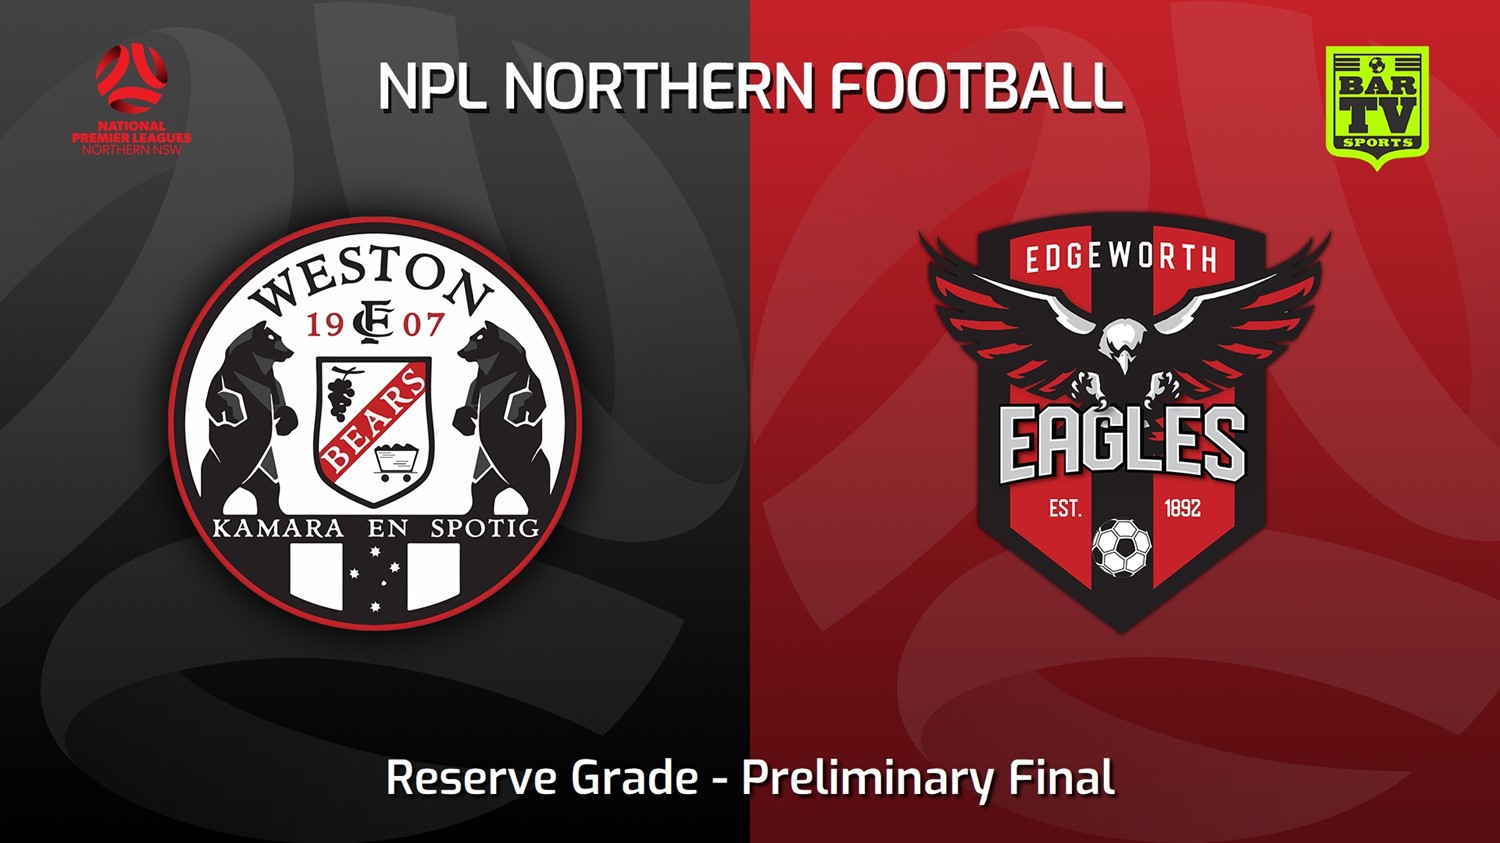 230903-NNSW NPLM Res Preliminary Final - Weston Workers FC Res v Edgeworth Eagles Res Minigame Slate Image